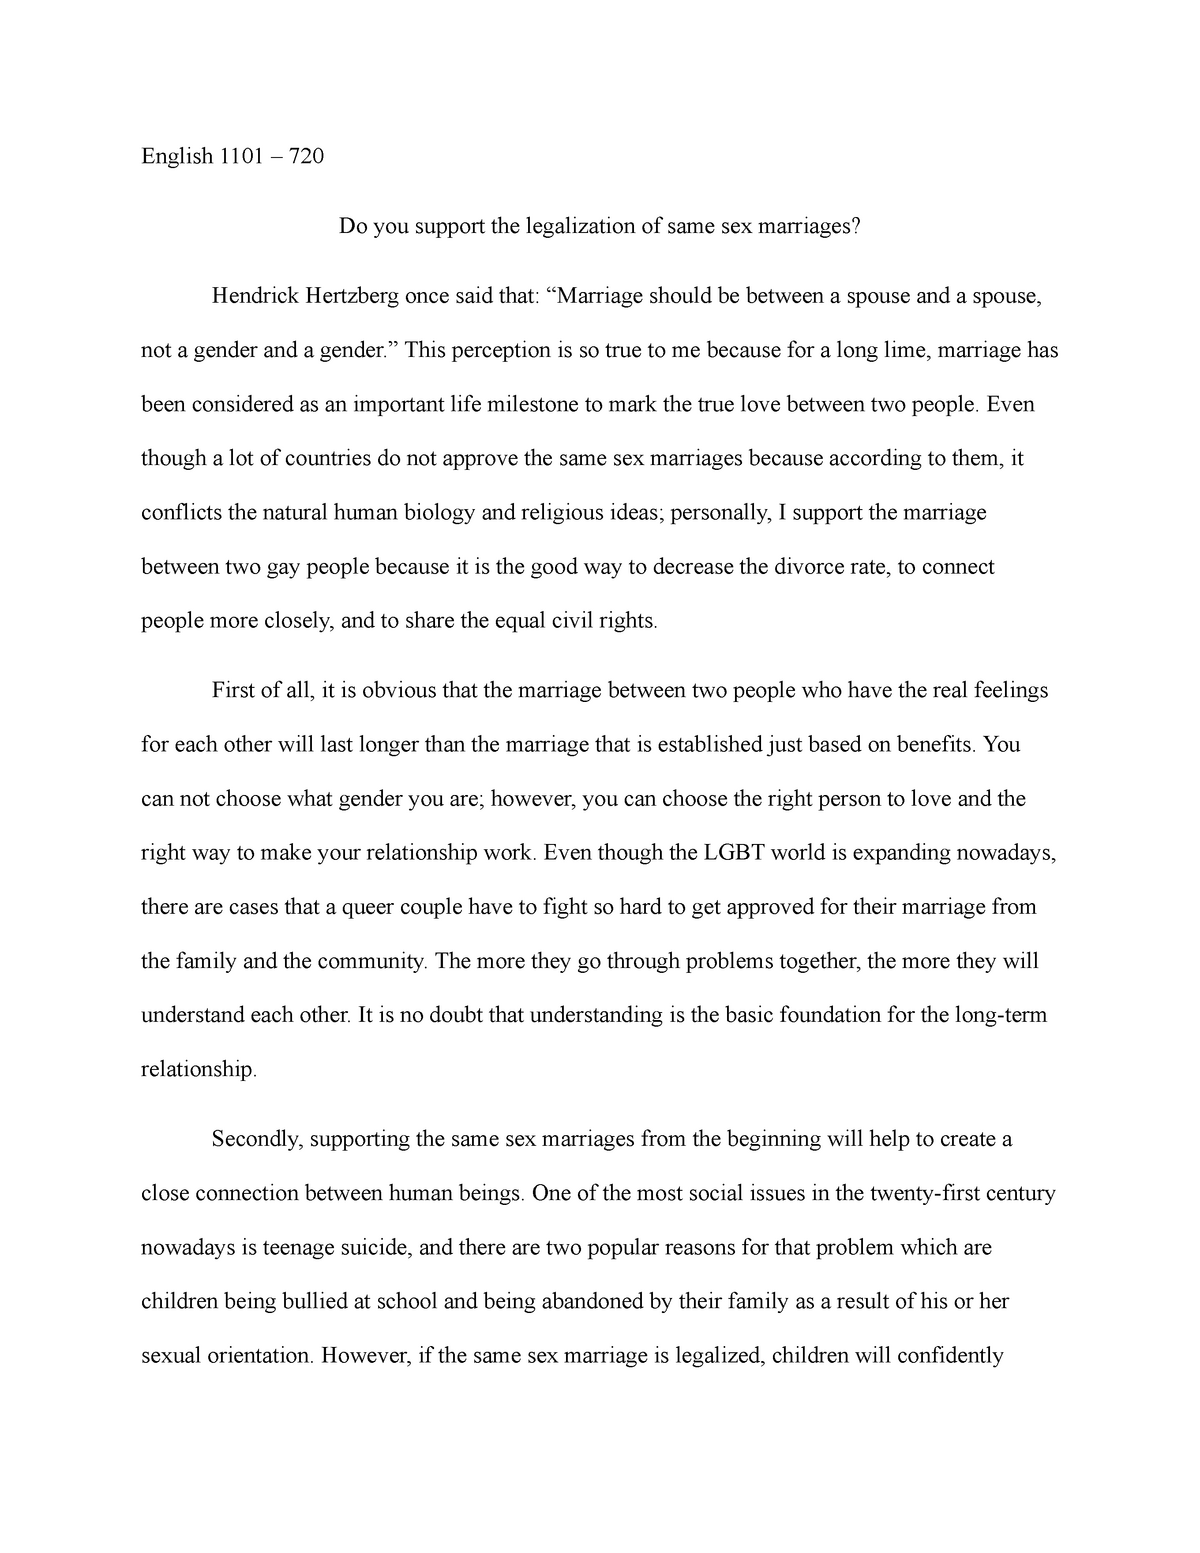 essay about same sex marriage 150 words